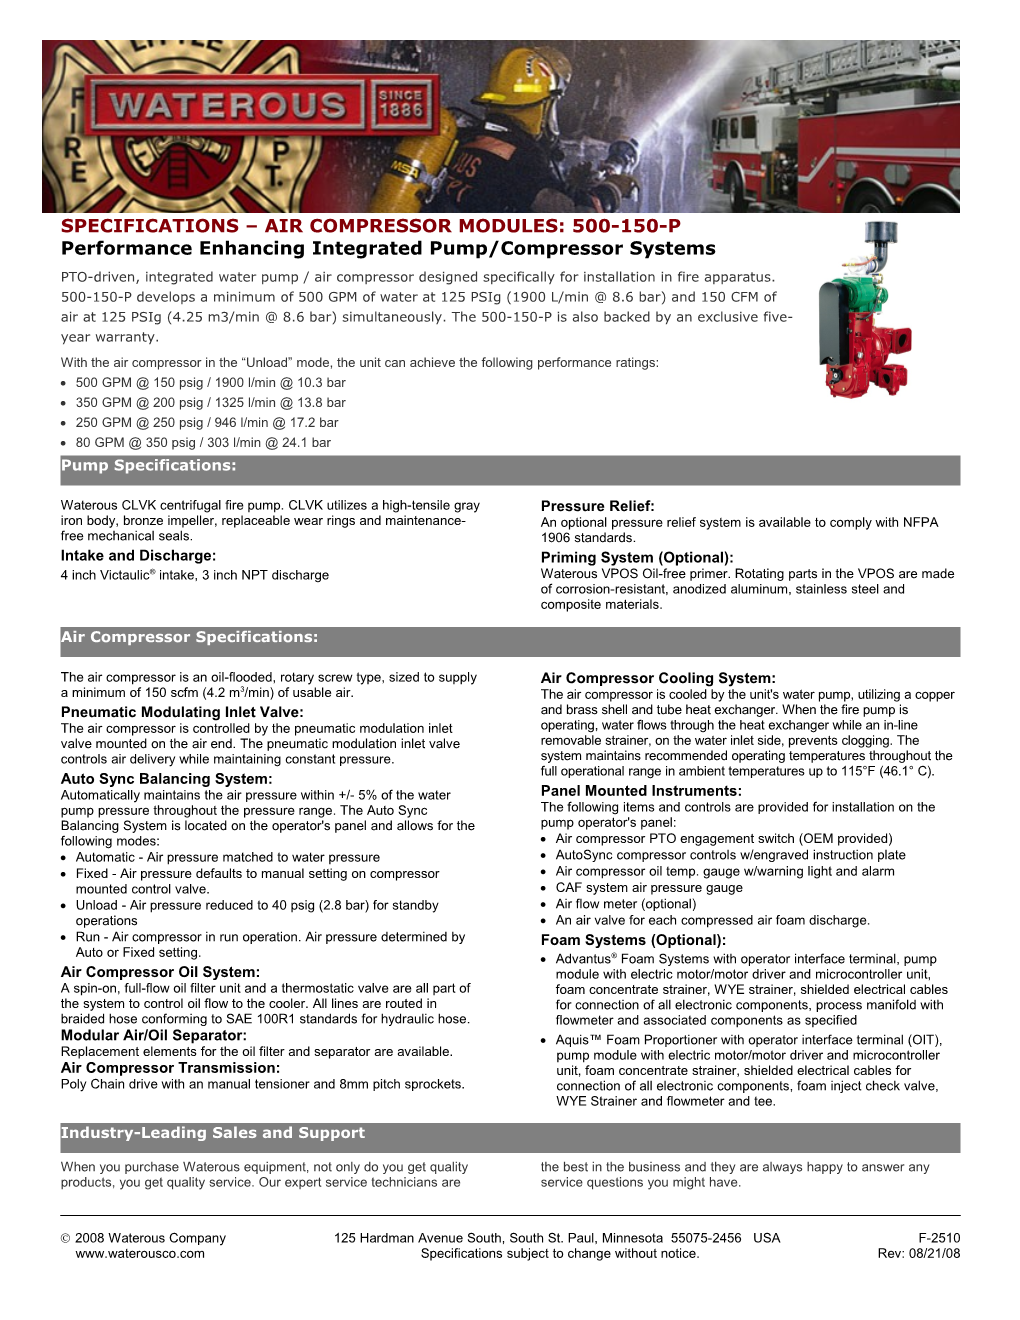 SPECIFICATIONS Air Compressor Modules:500-150-P Performance Enhancing Integrated